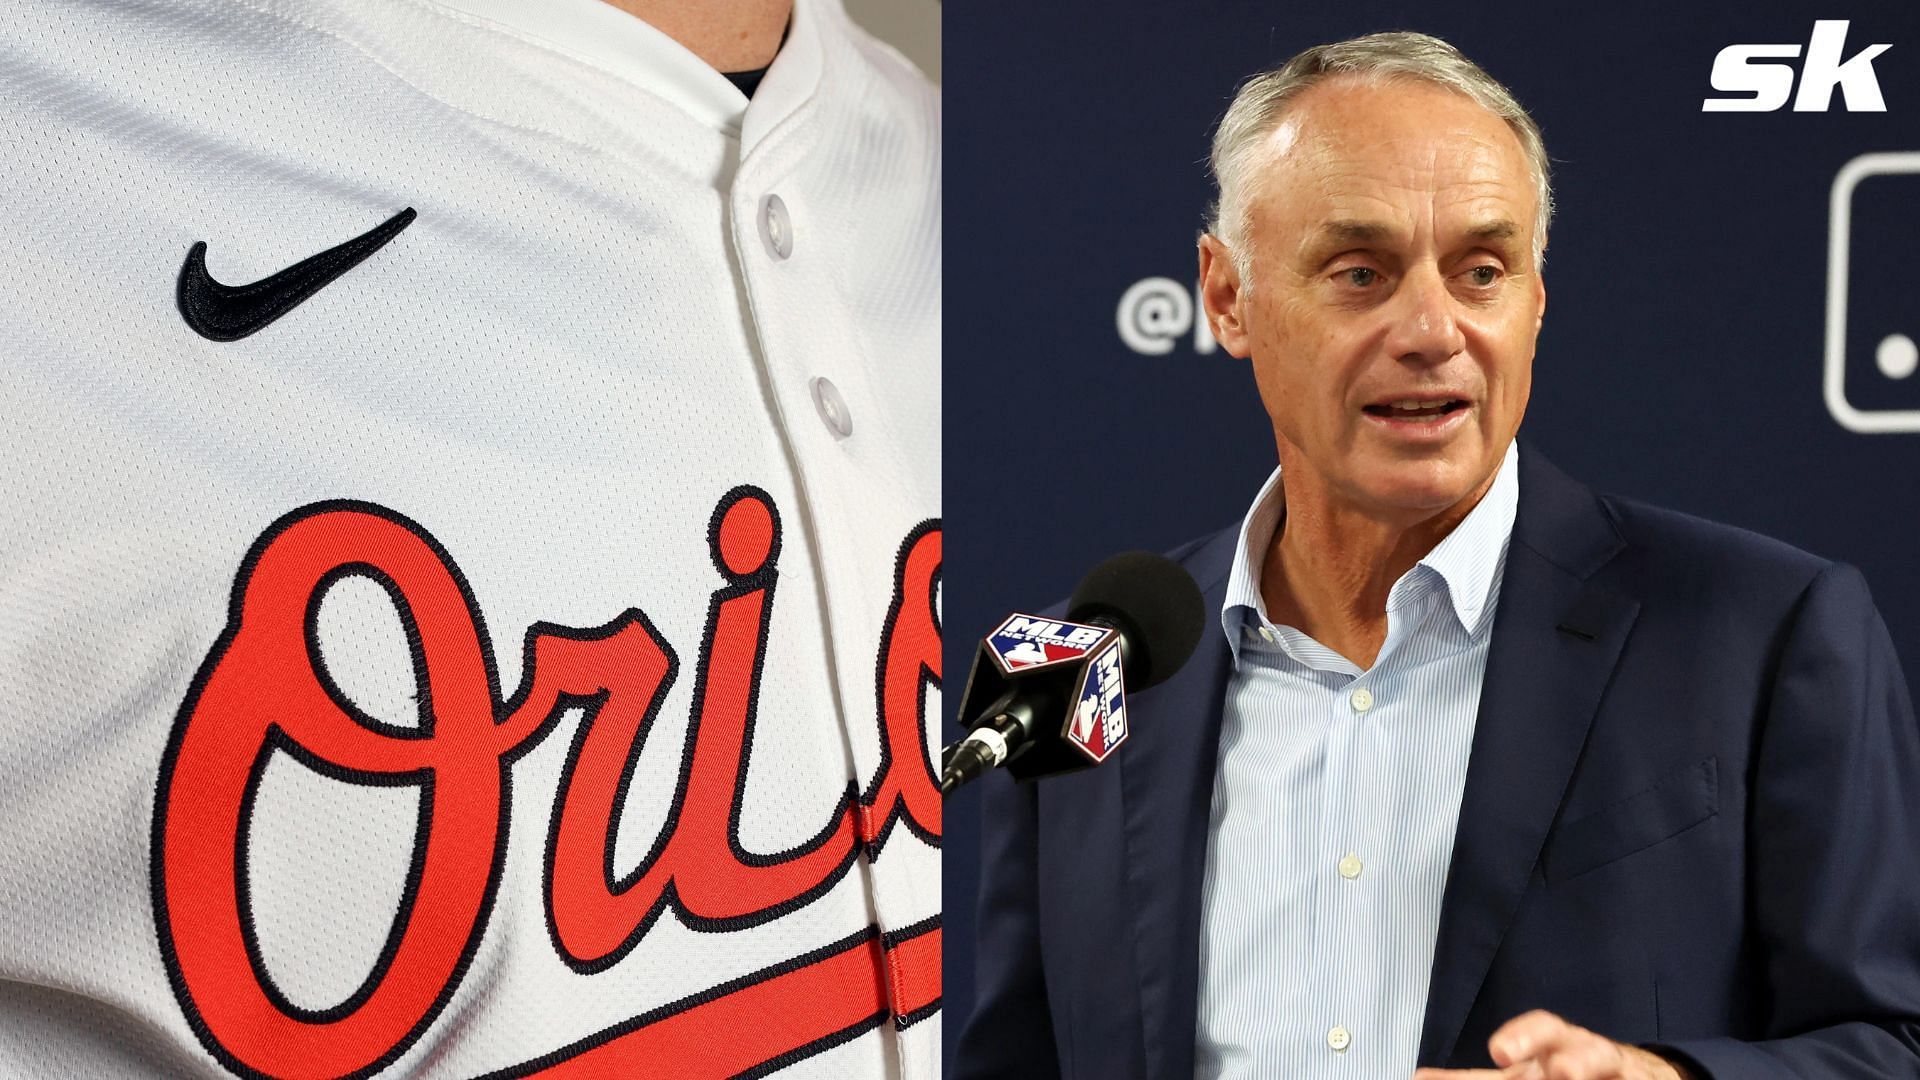 MLB Commissioner Rob Manfred says that the league and Nike will be making uniform changes next season